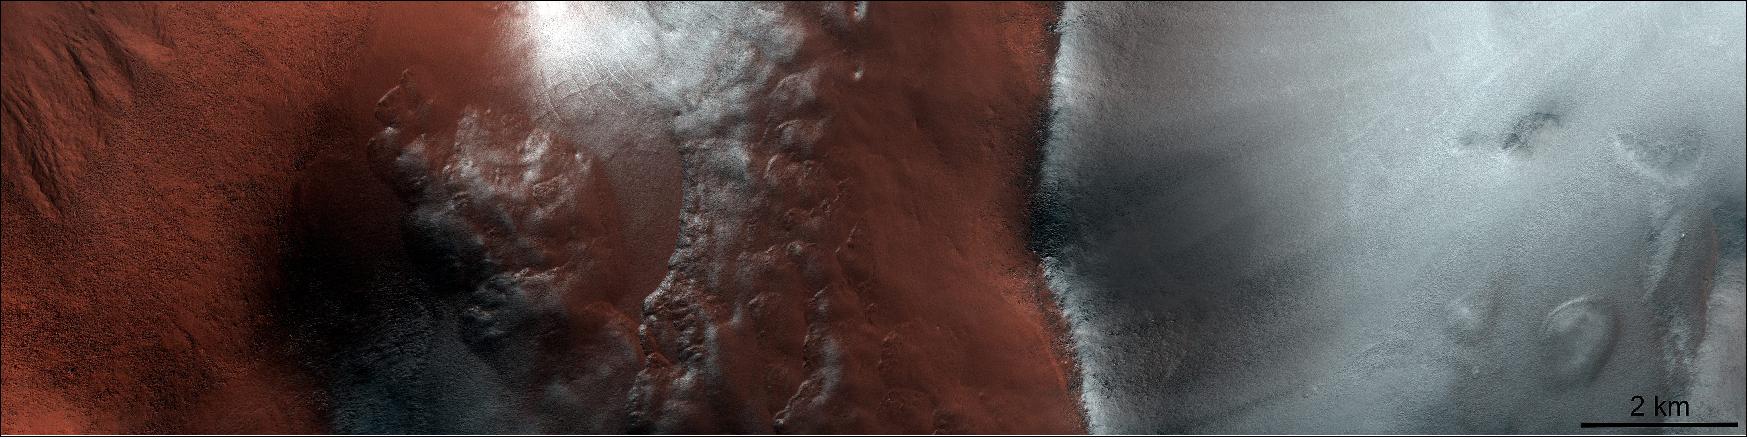 Figure 43: Argyre impact basin after spring equinox. This image of the Argyre impact basin in the southern highlands of Mars was taken on 28 April 2020 just as Mars had passed its southern hemisphere spring equinox. The seasonal ice in the 800km-long impact basin is receding while the ridge on the right side of the image is still covered with frost. The image is centered at 57.5°S, 310.2°E. The frost-covered ridge is facing the pole, therefore receiving less solar radiation than the neighboring equator-facing slope. On Mars, incoming solar radiation transforms the ice into water vapor directly without melting it first into water in a process called sublimation. Since the north-facing slope (on the left) has had a longer exposure to solar radiation, its ice has sublimated more quickly (image credit: ESA/ExoMars/CaSSIS)